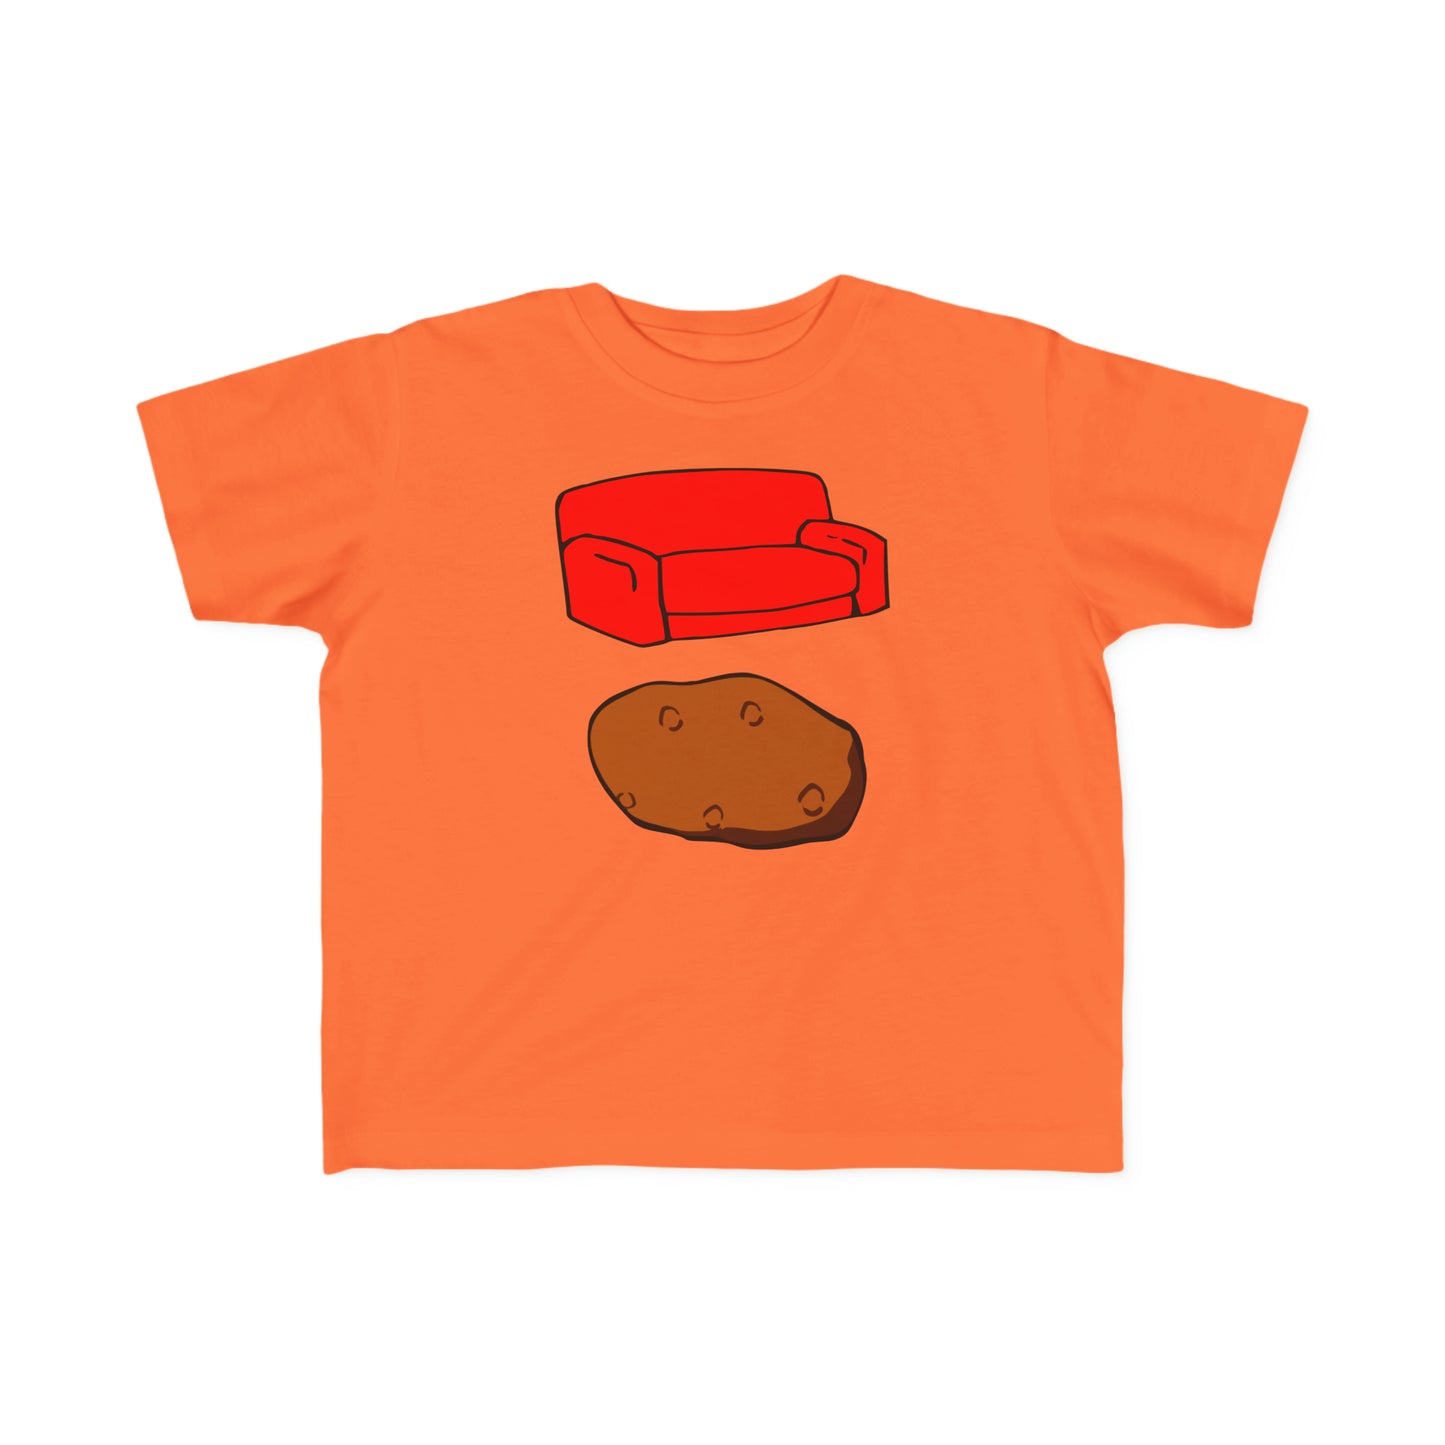 Couch Potato Toddler T-Shirt, Popular Football Team Colors, Graphic Tee showing Couch and a Potato, Baby Football Fan T-Shirt, Cute Baby Tee